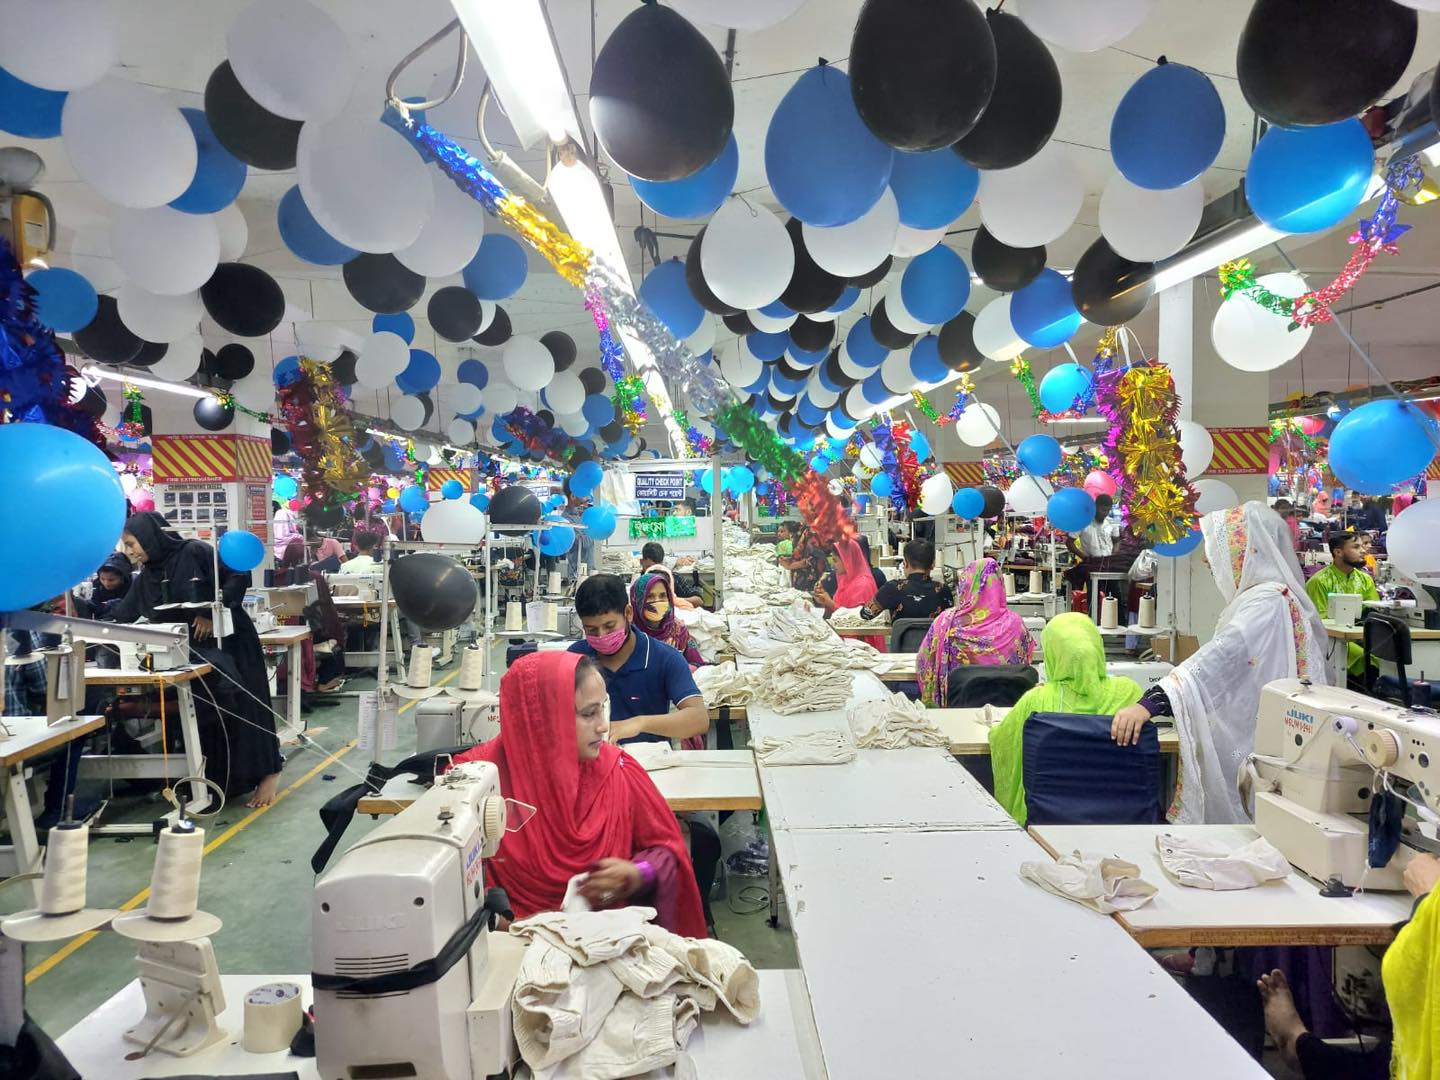 Pre Eid celebrations by decorating the factory beautifully